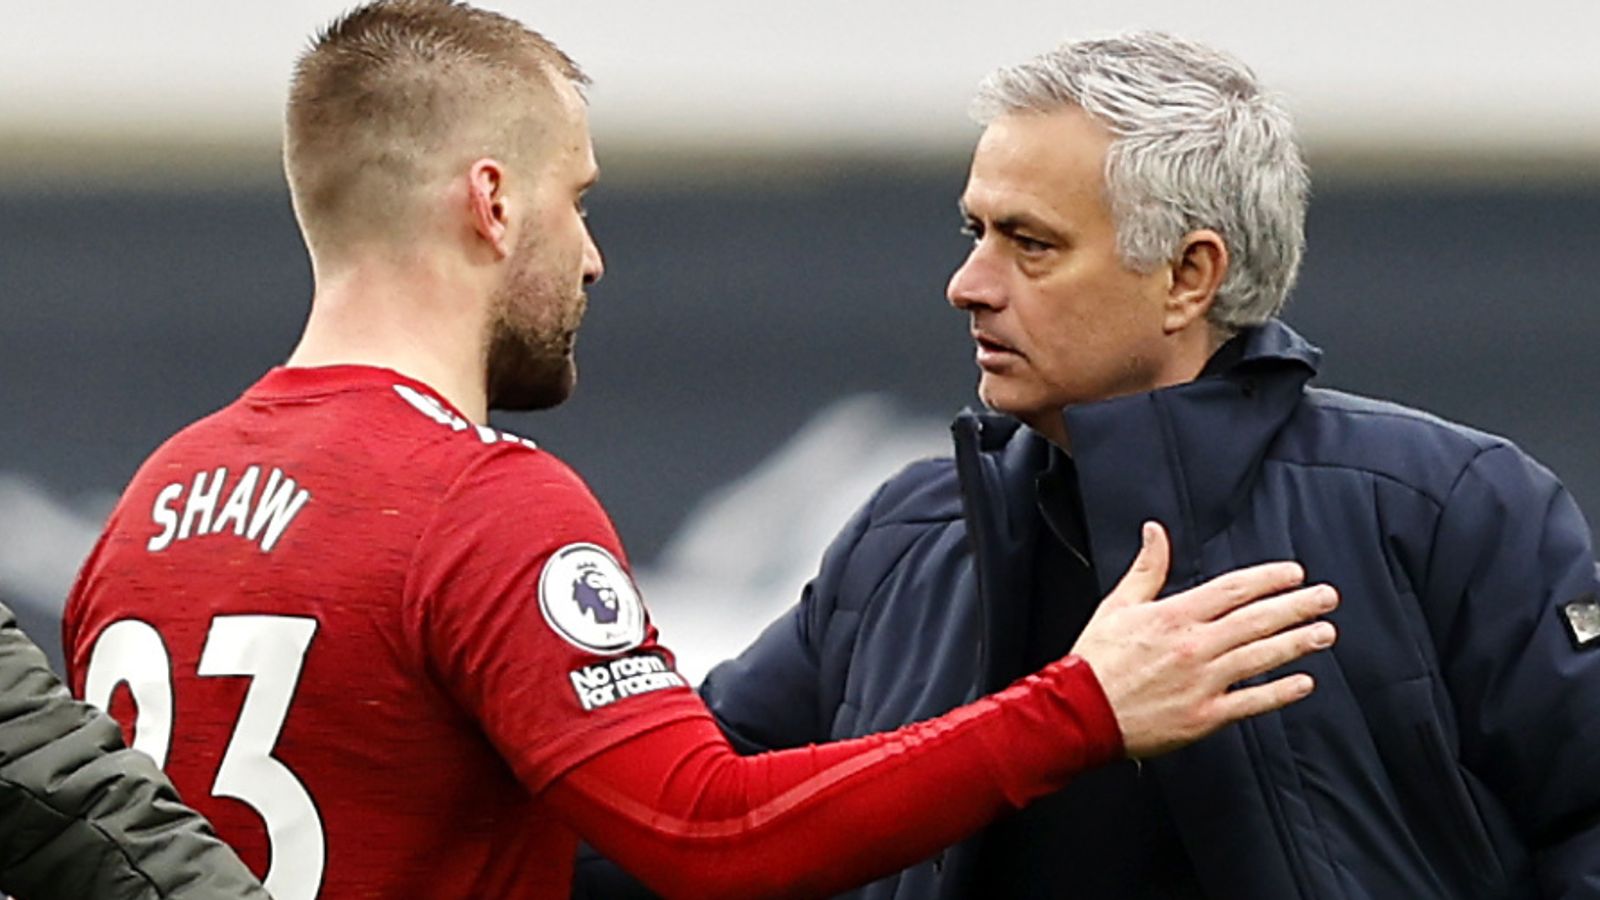 England's Luke Shaw bemused by Jose Mourinho's continued criticism: 'I am trying..